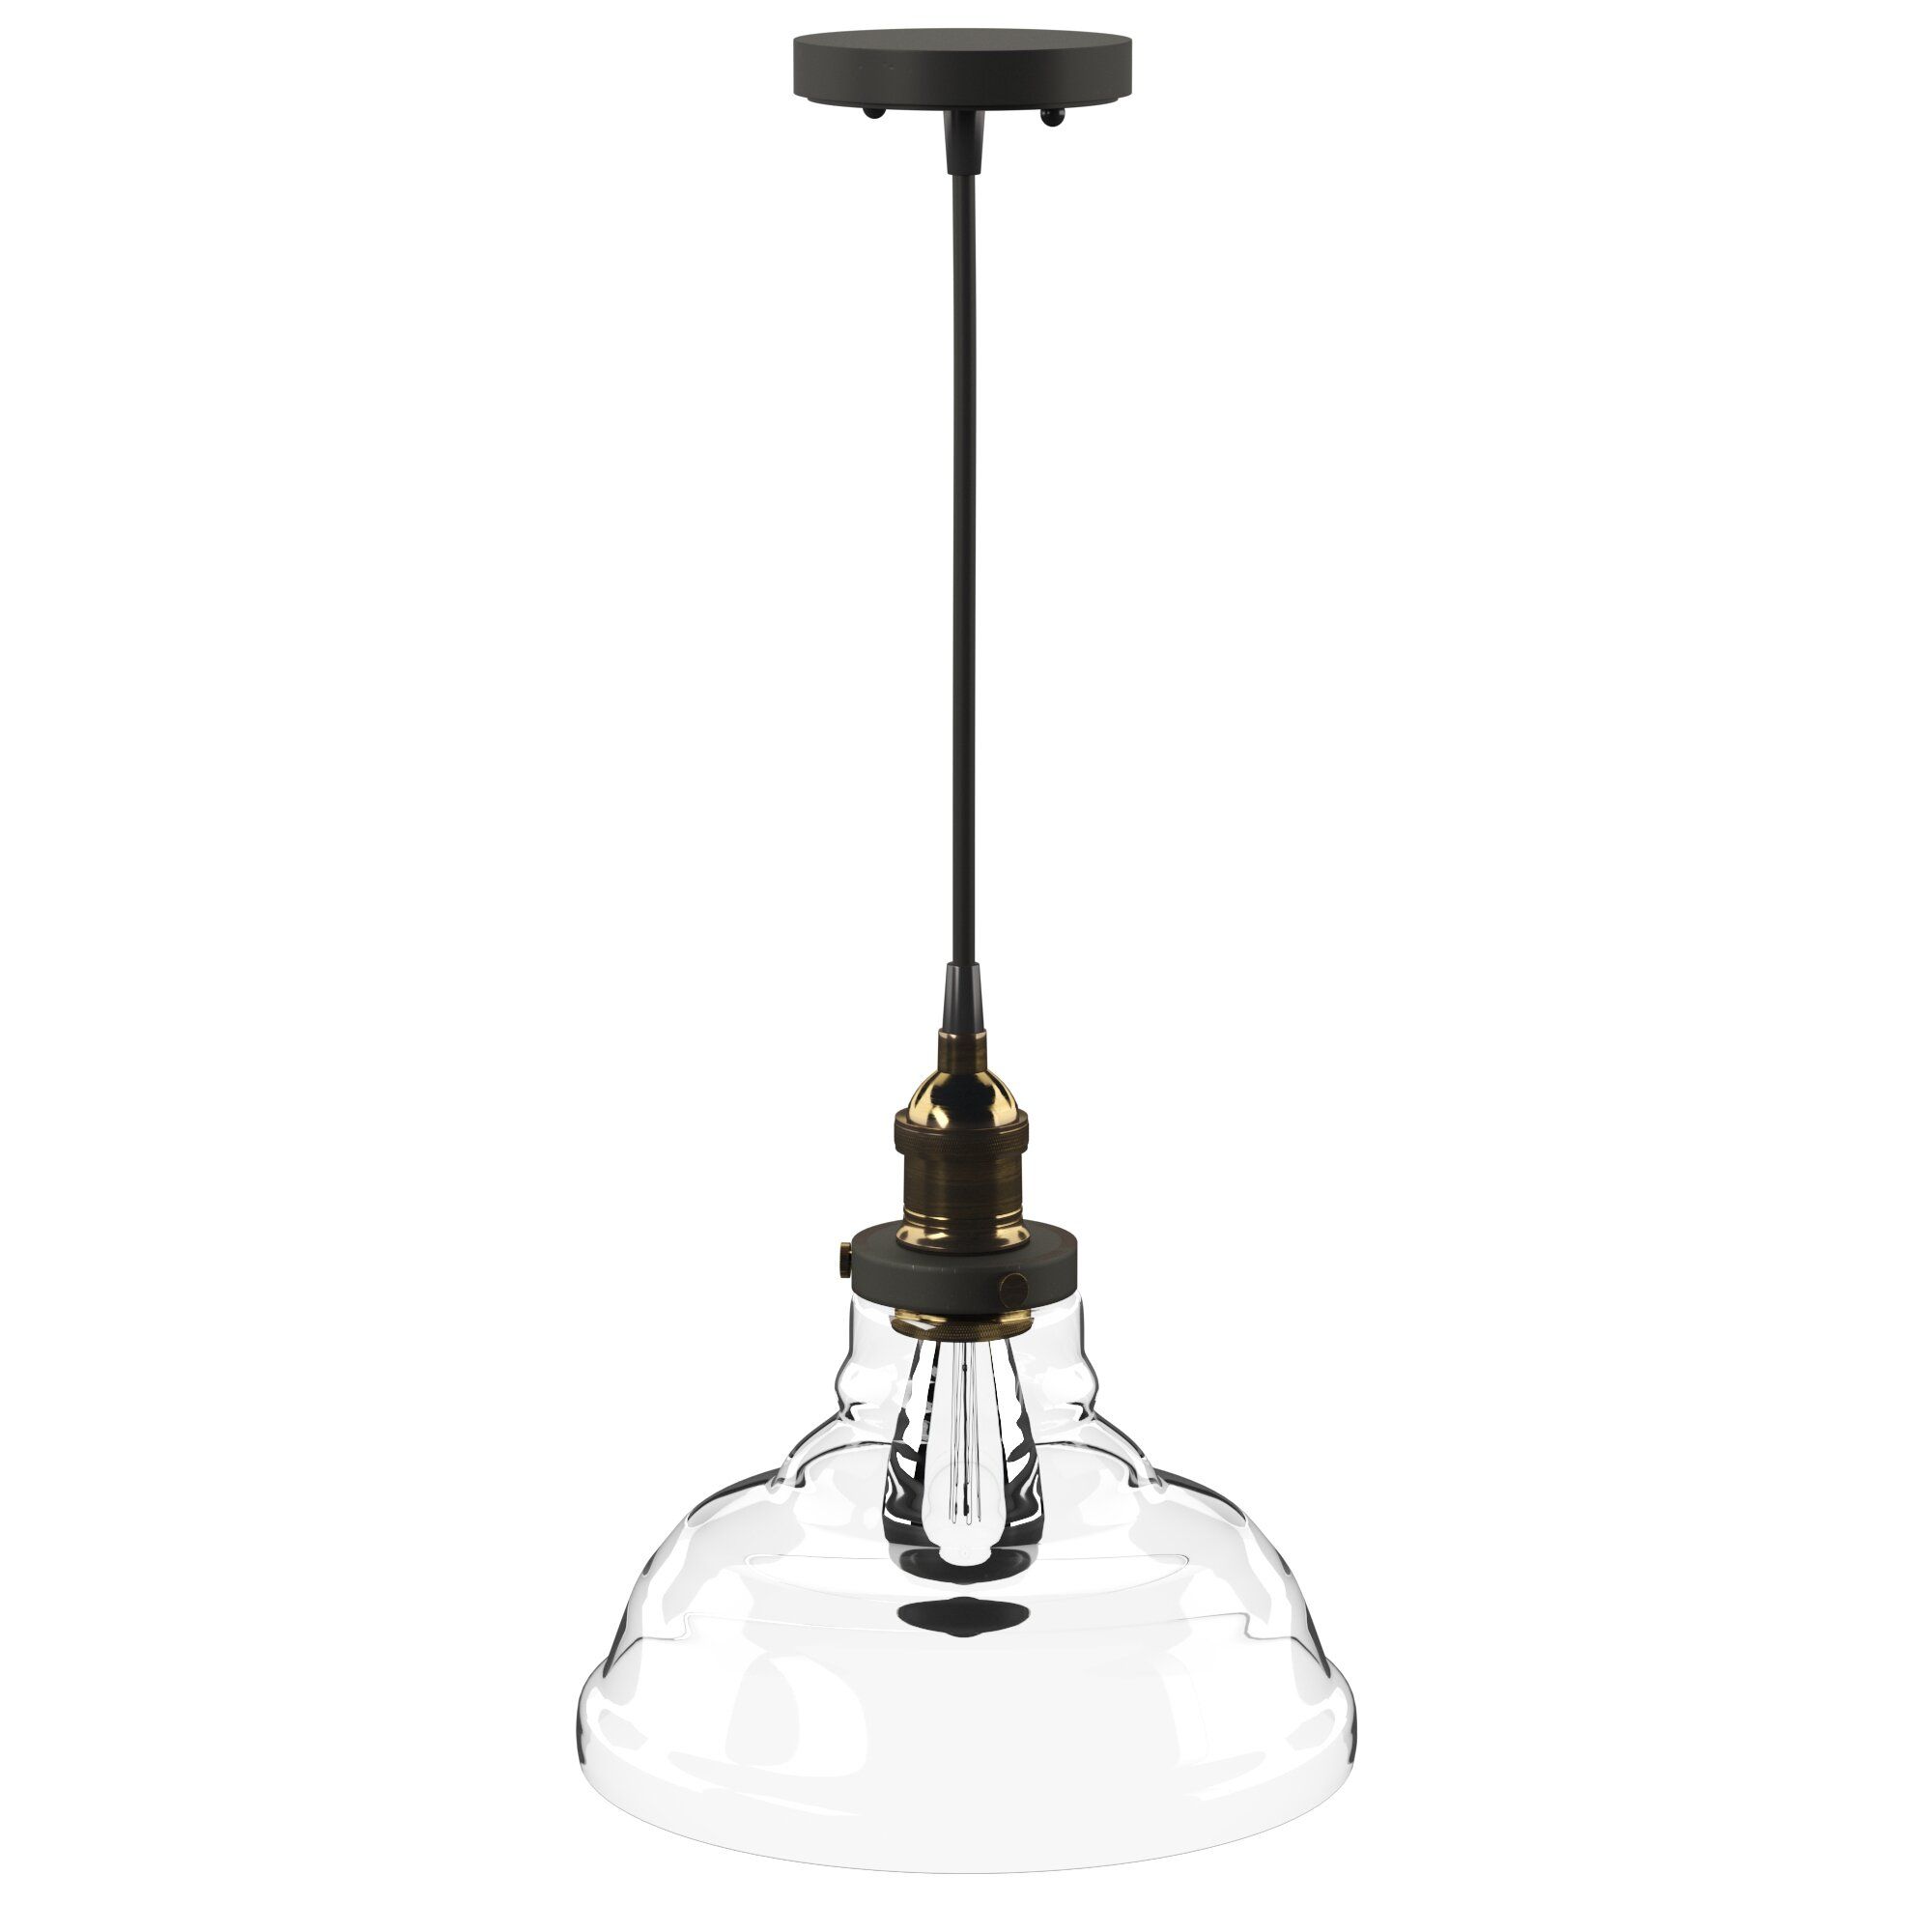 Bell Shaped Pendant Light You'll Love In 2019 | Wayfair In Terry 1 Light Single Bell Pendants (View 19 of 30)